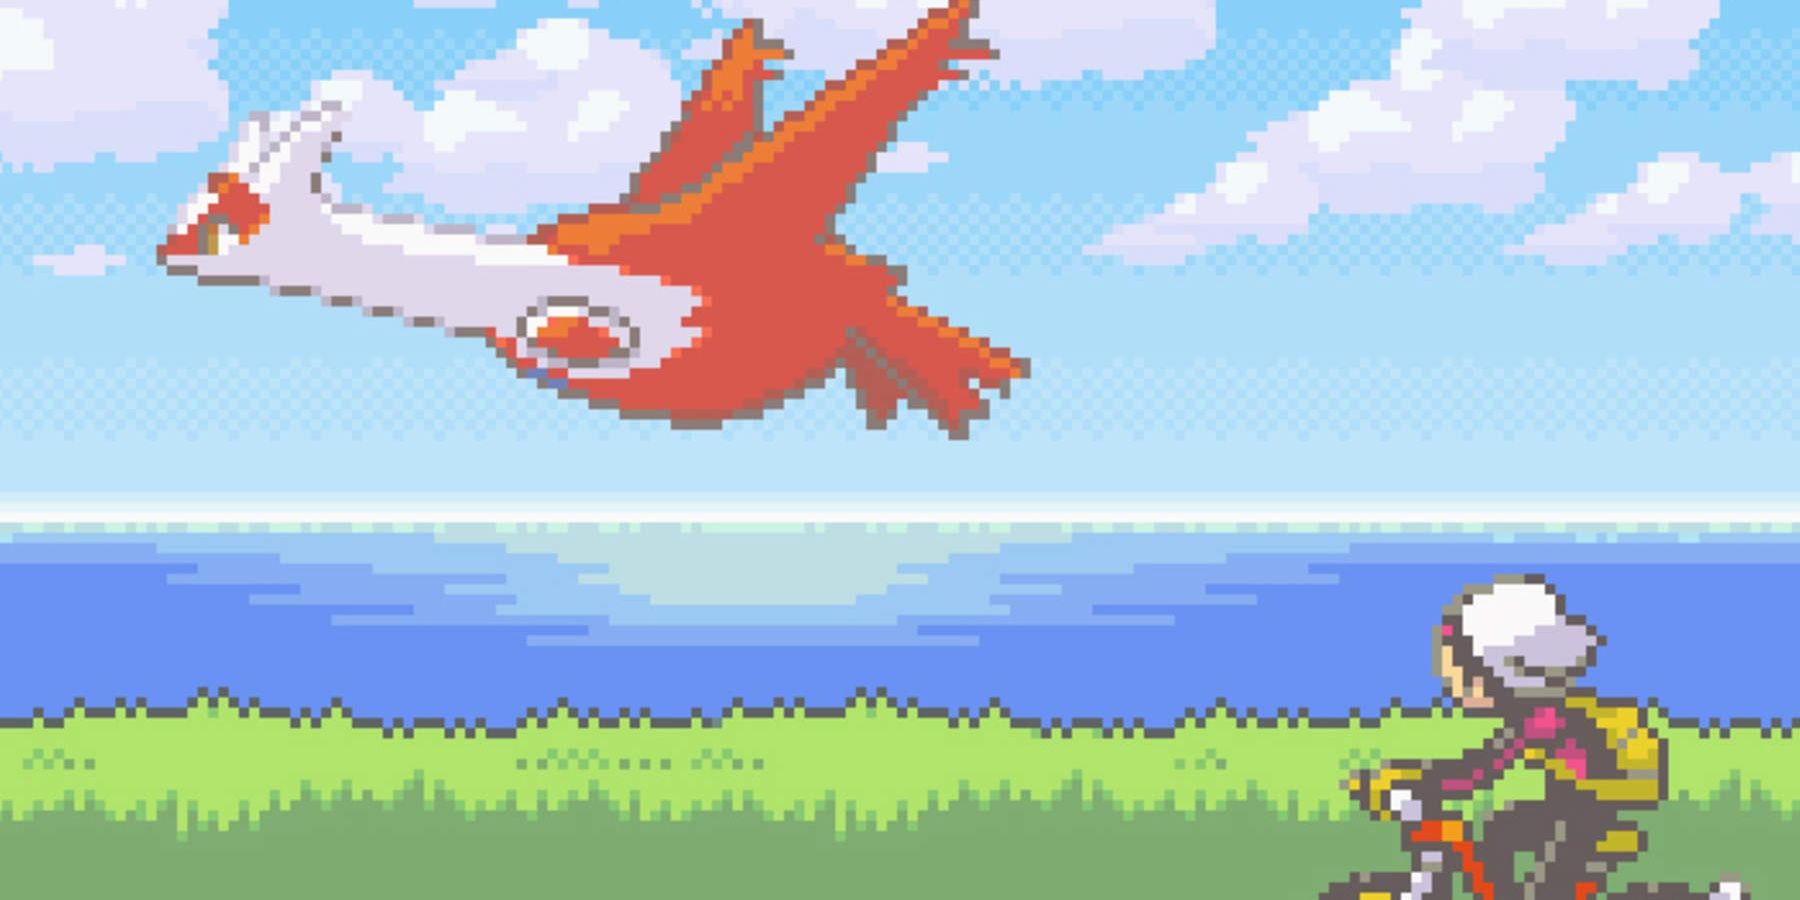 The trainer riding along the seafront on a bike while Latias flies overhead in Pokemon Ruby.